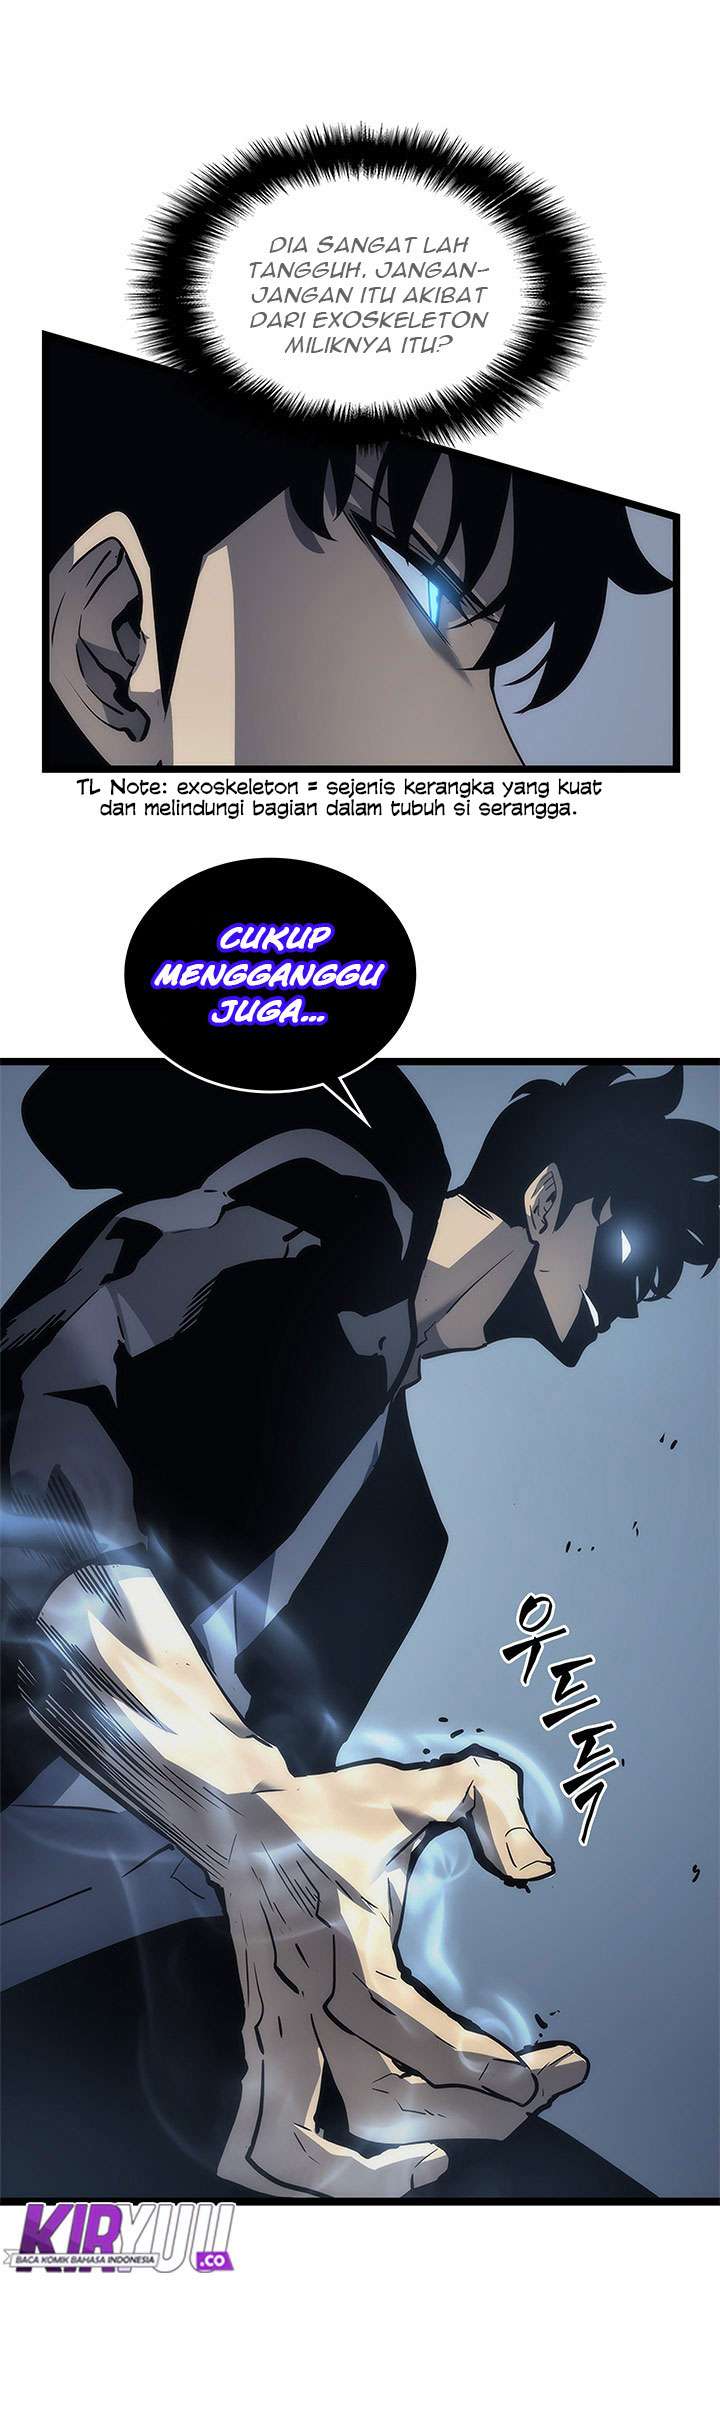 Solo Leveling Chapter 102 Bahasa Indonesia